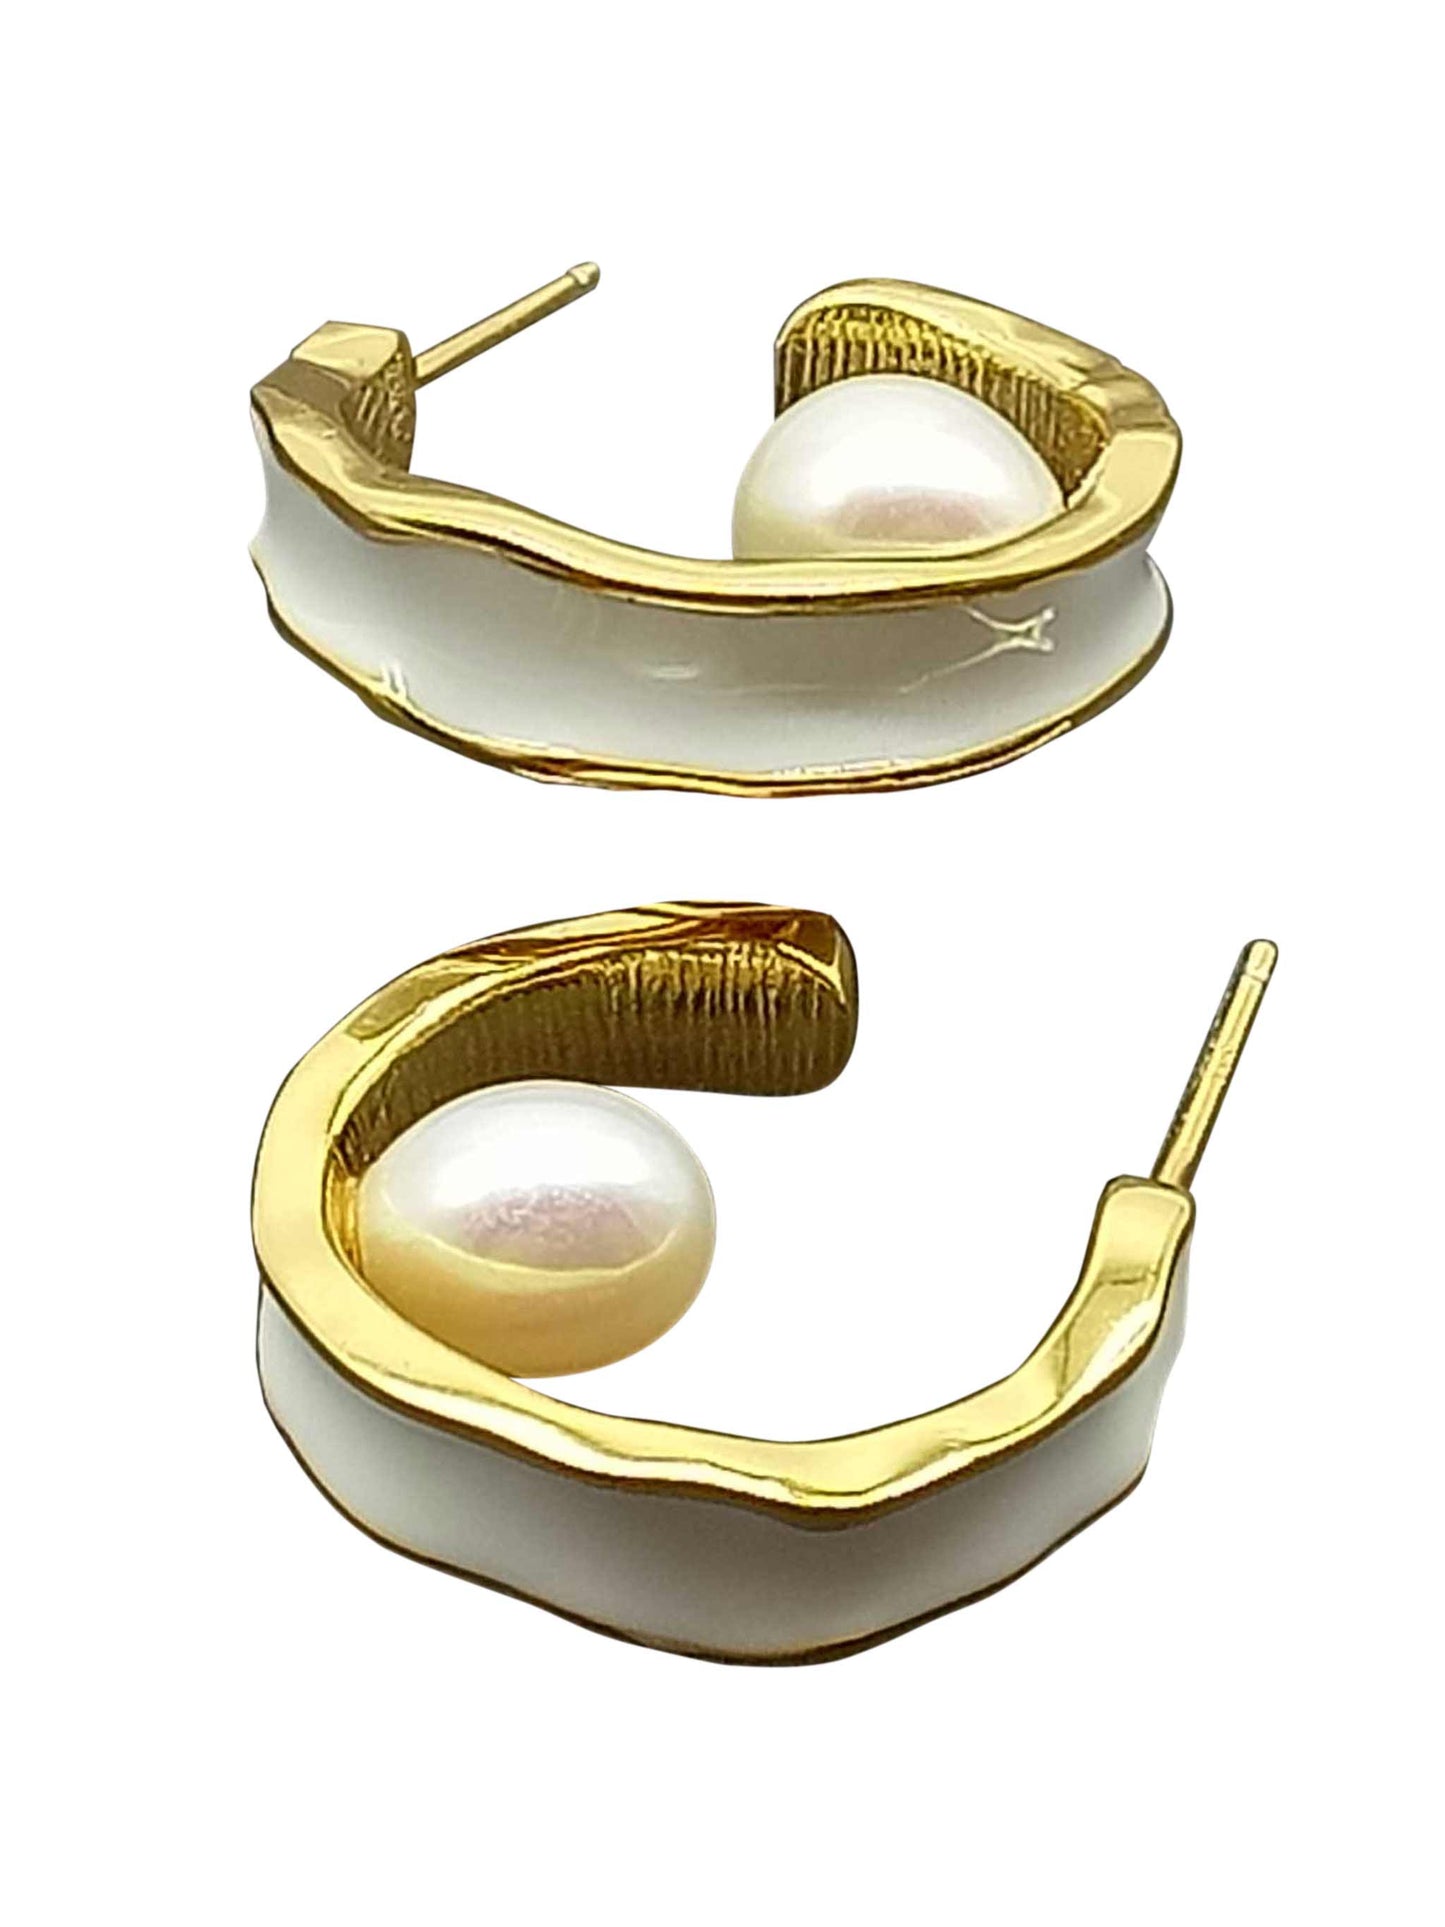 Gold & White Introvert Hoop Earrings with Fresh Water Pearls - Shop Charlies Interiors